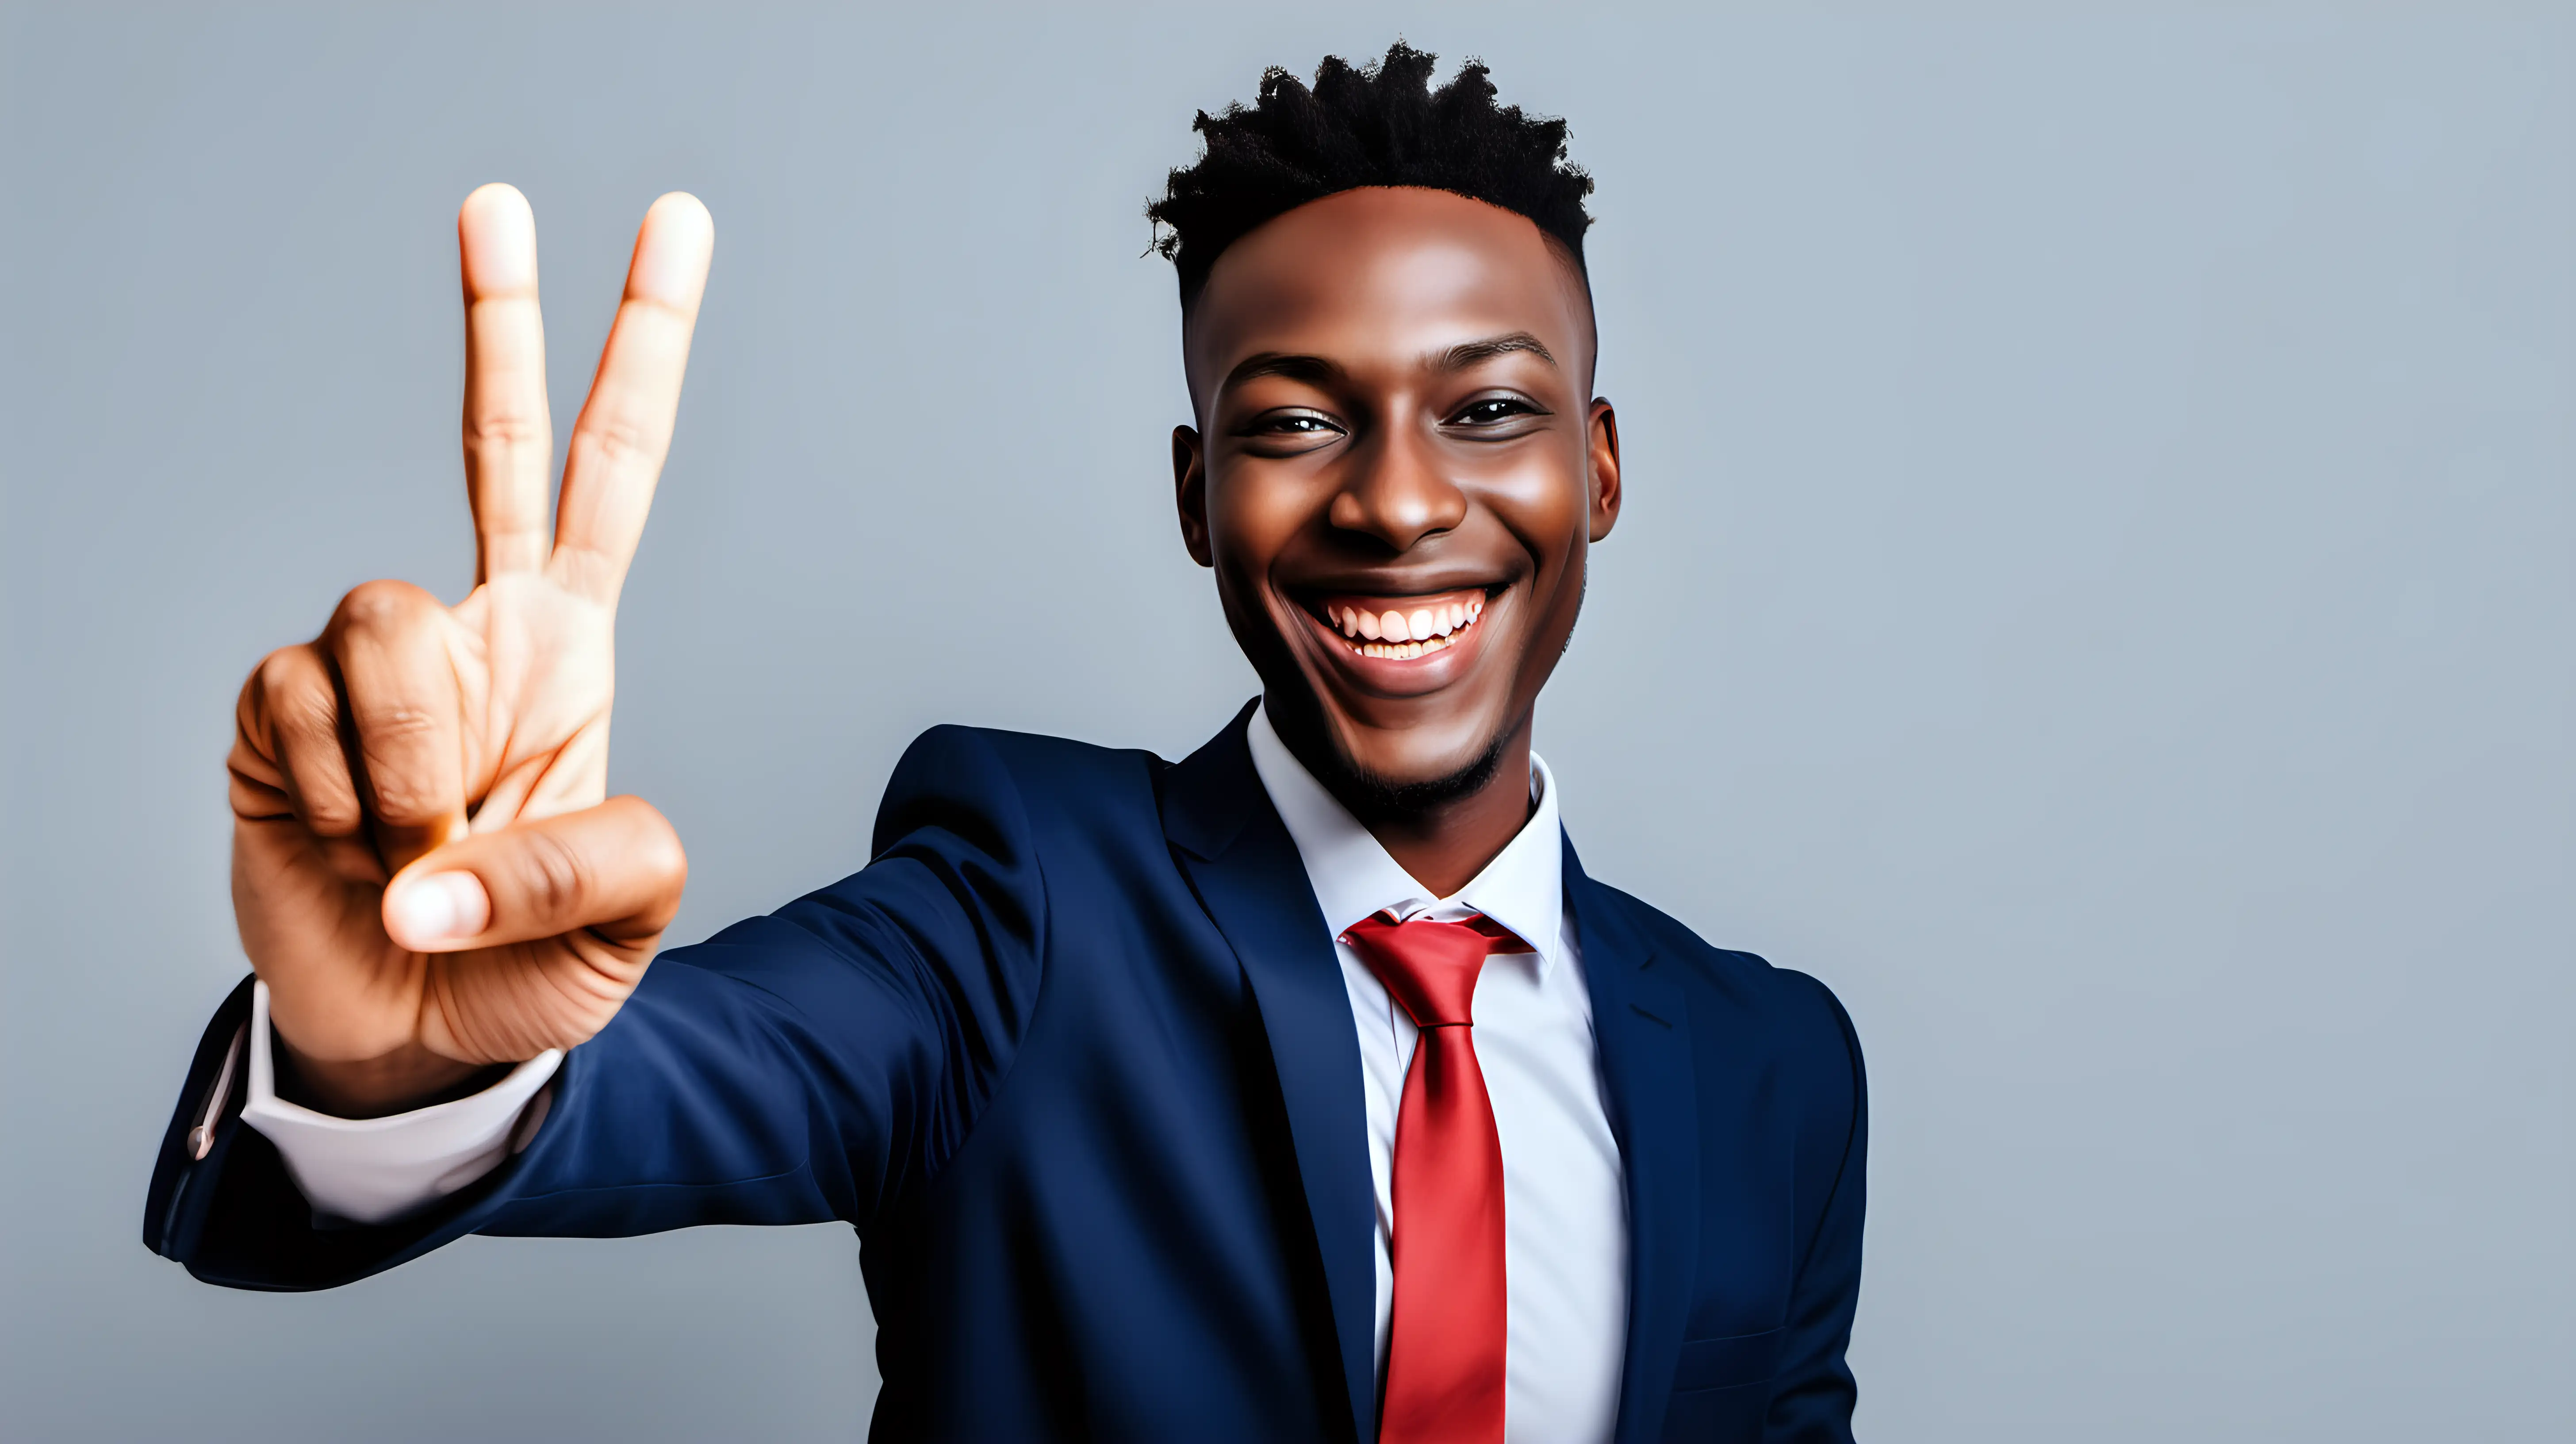 A job seeker smiling brightly and flashing the victory sign after receiving a job offer, signaling their triumph in the competitive job market.
